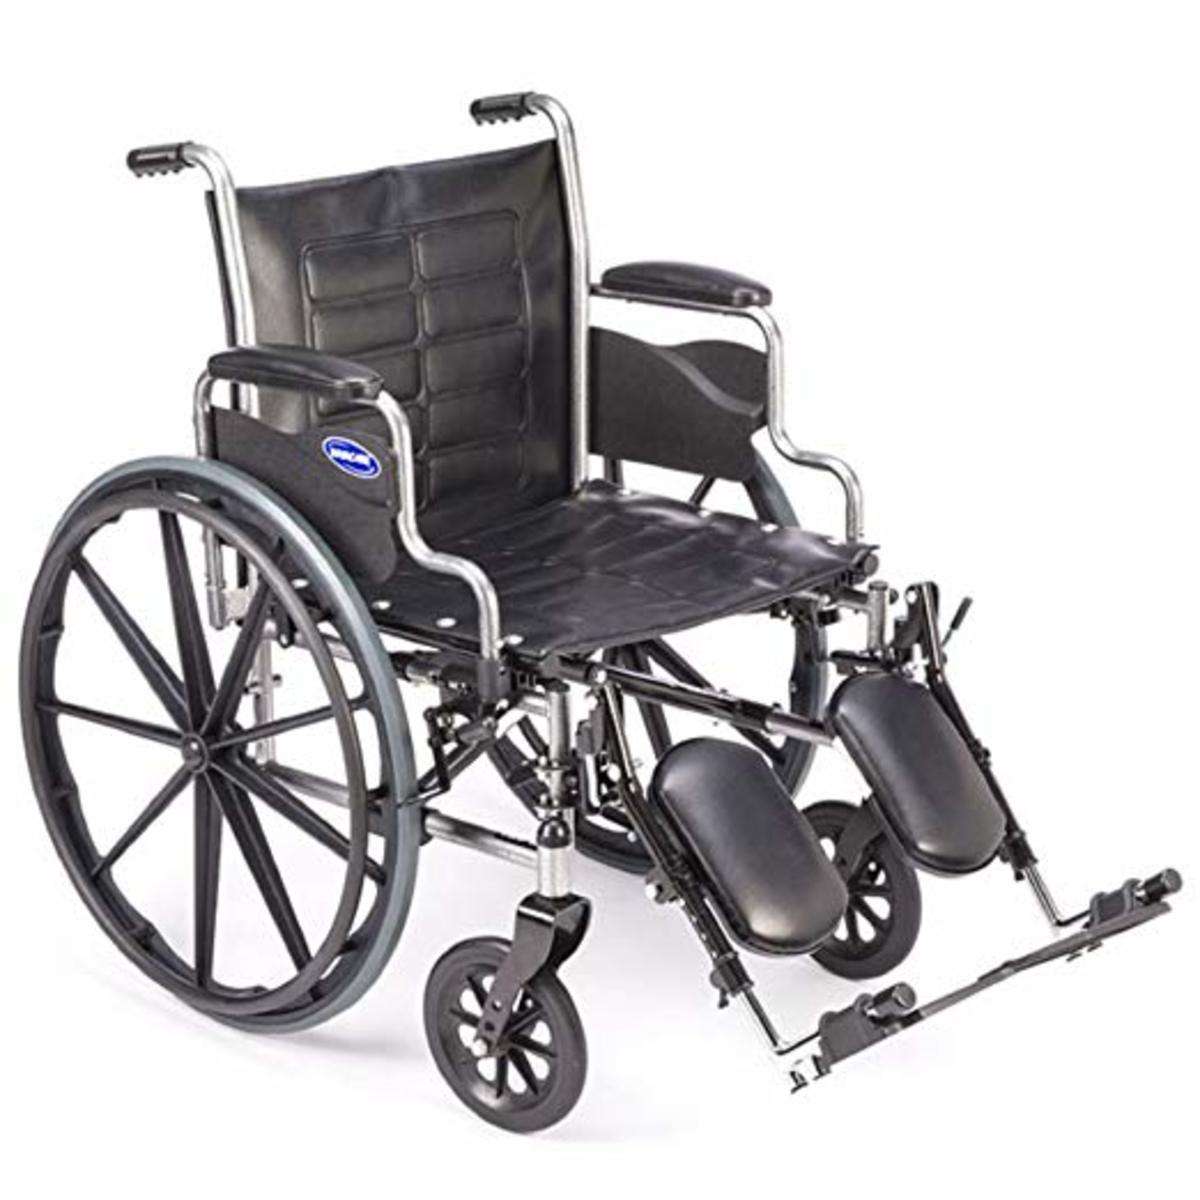 Invacare Tracer IV Heavy-Duty Wheelchair, Desk-Length Arms, 450 lb Weight Capacity